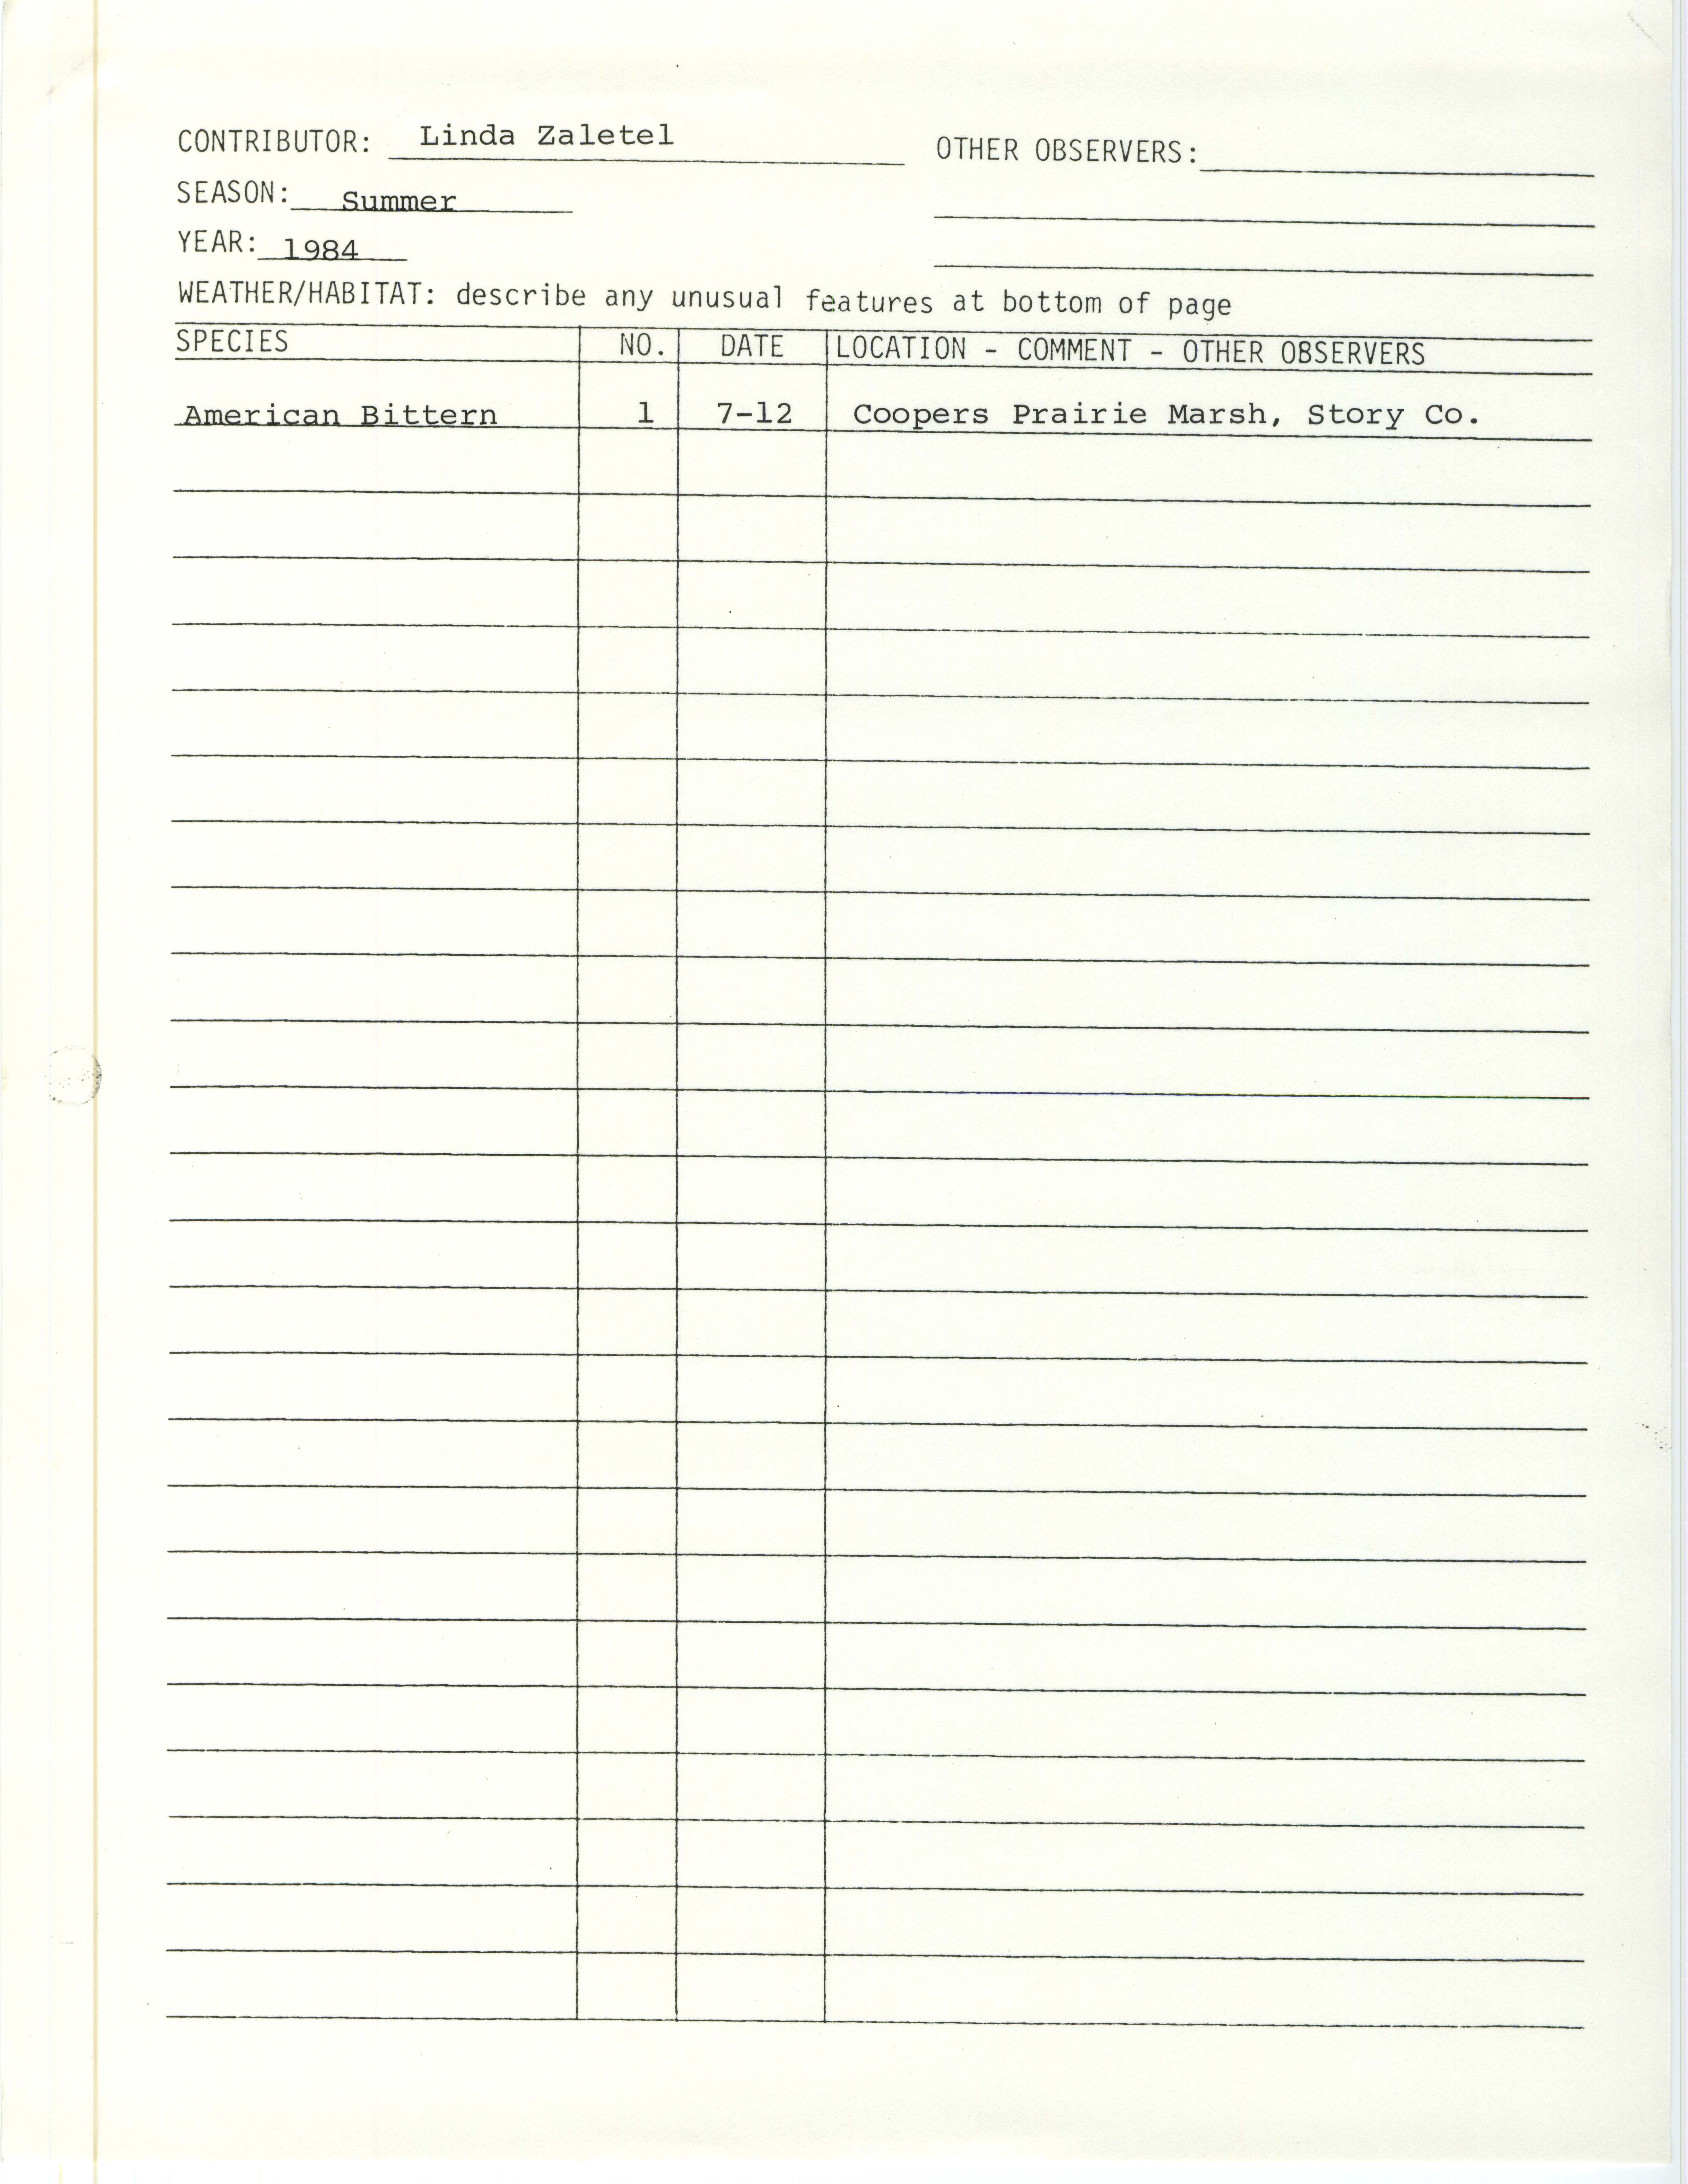 Field notes contributed by Linda Zaletel, summer 1984